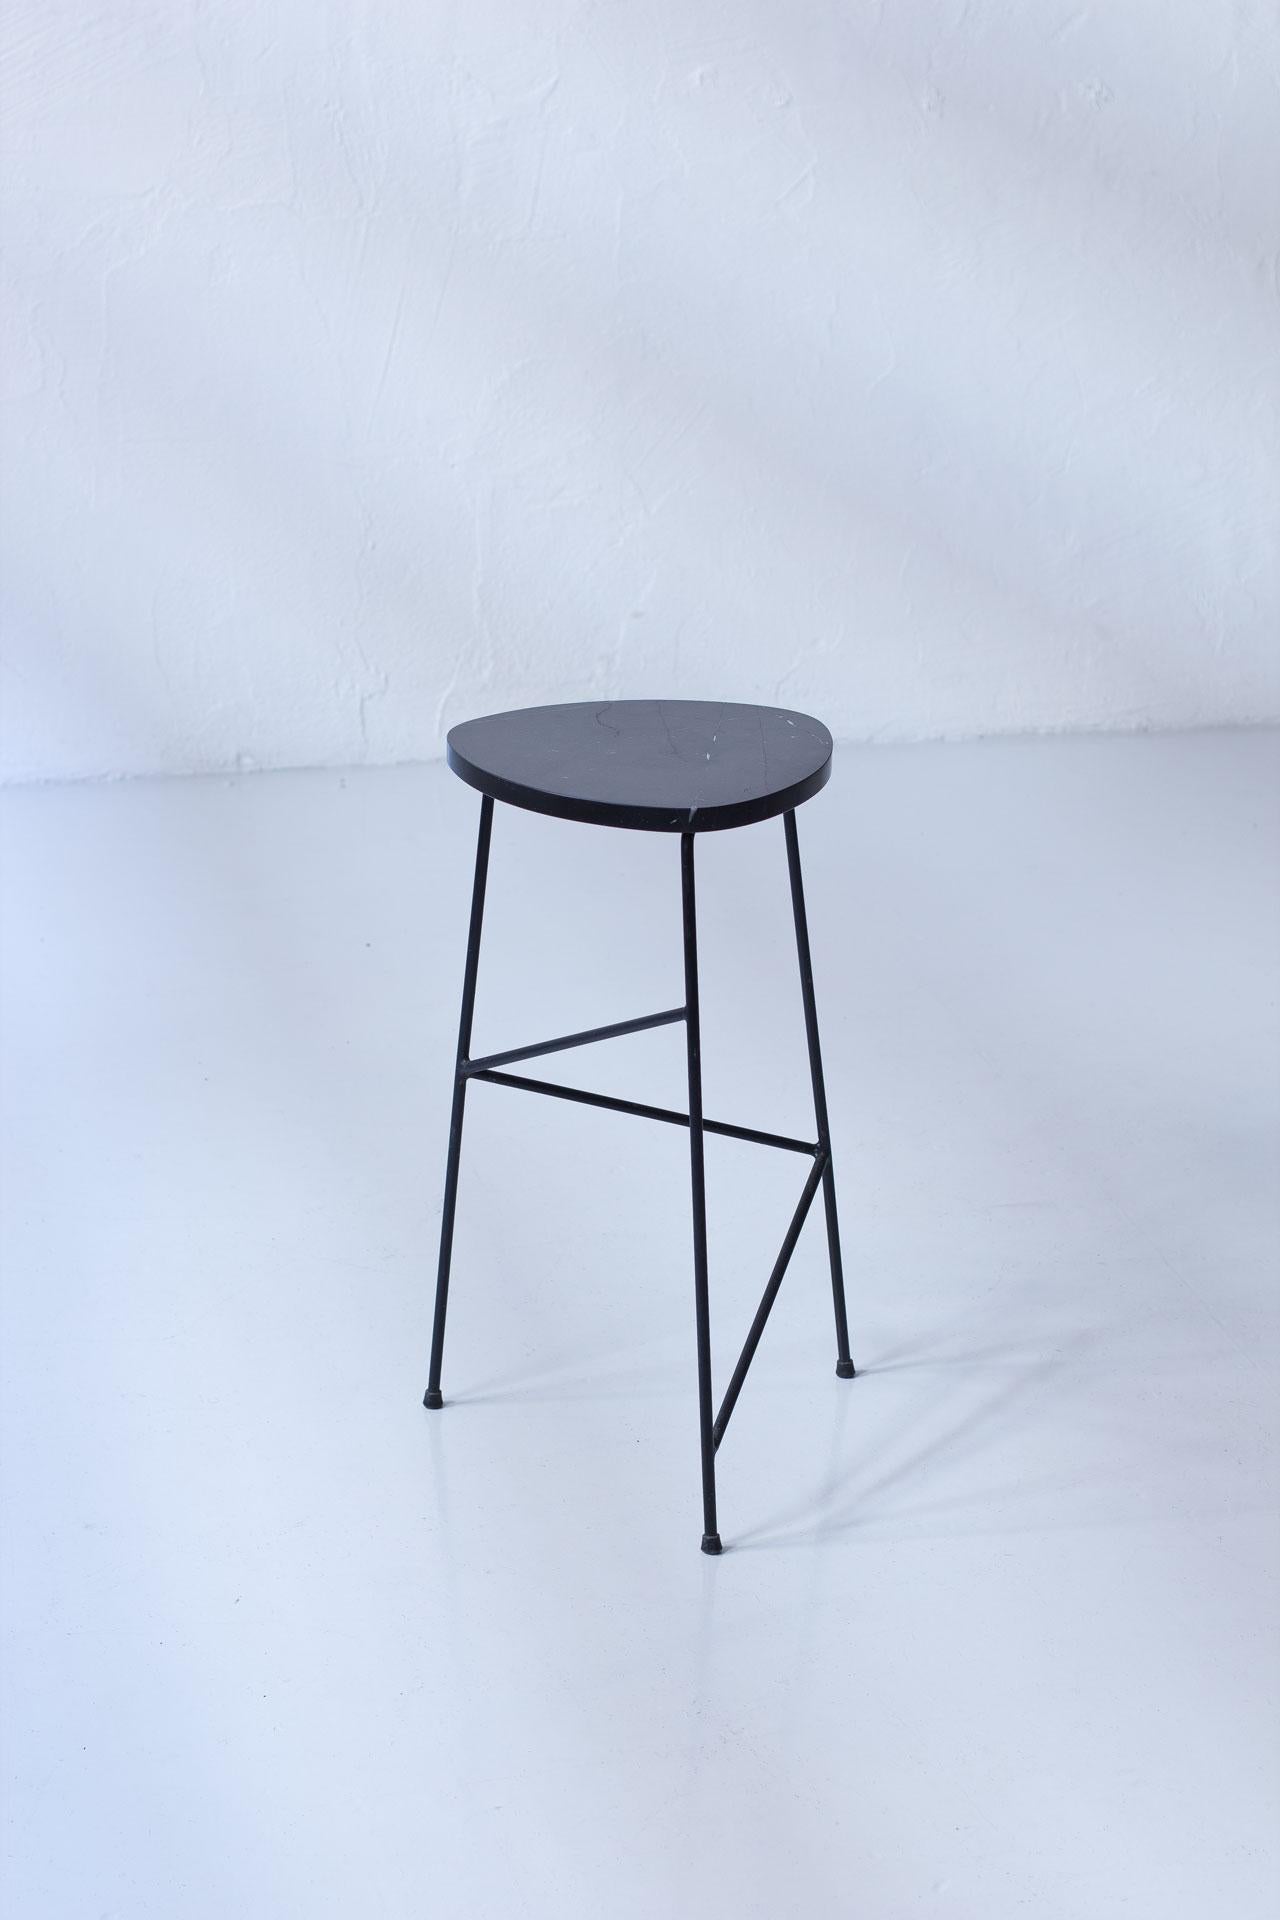 Lovely pedestal designed by Sven Sahlberg, manufactured by 
AB Nybrofabriken, Fröseke in Sweden during the 1950s. The table is made from black Belgian marble slab with black plastic coated metal legs. 

The combination of materials and simple